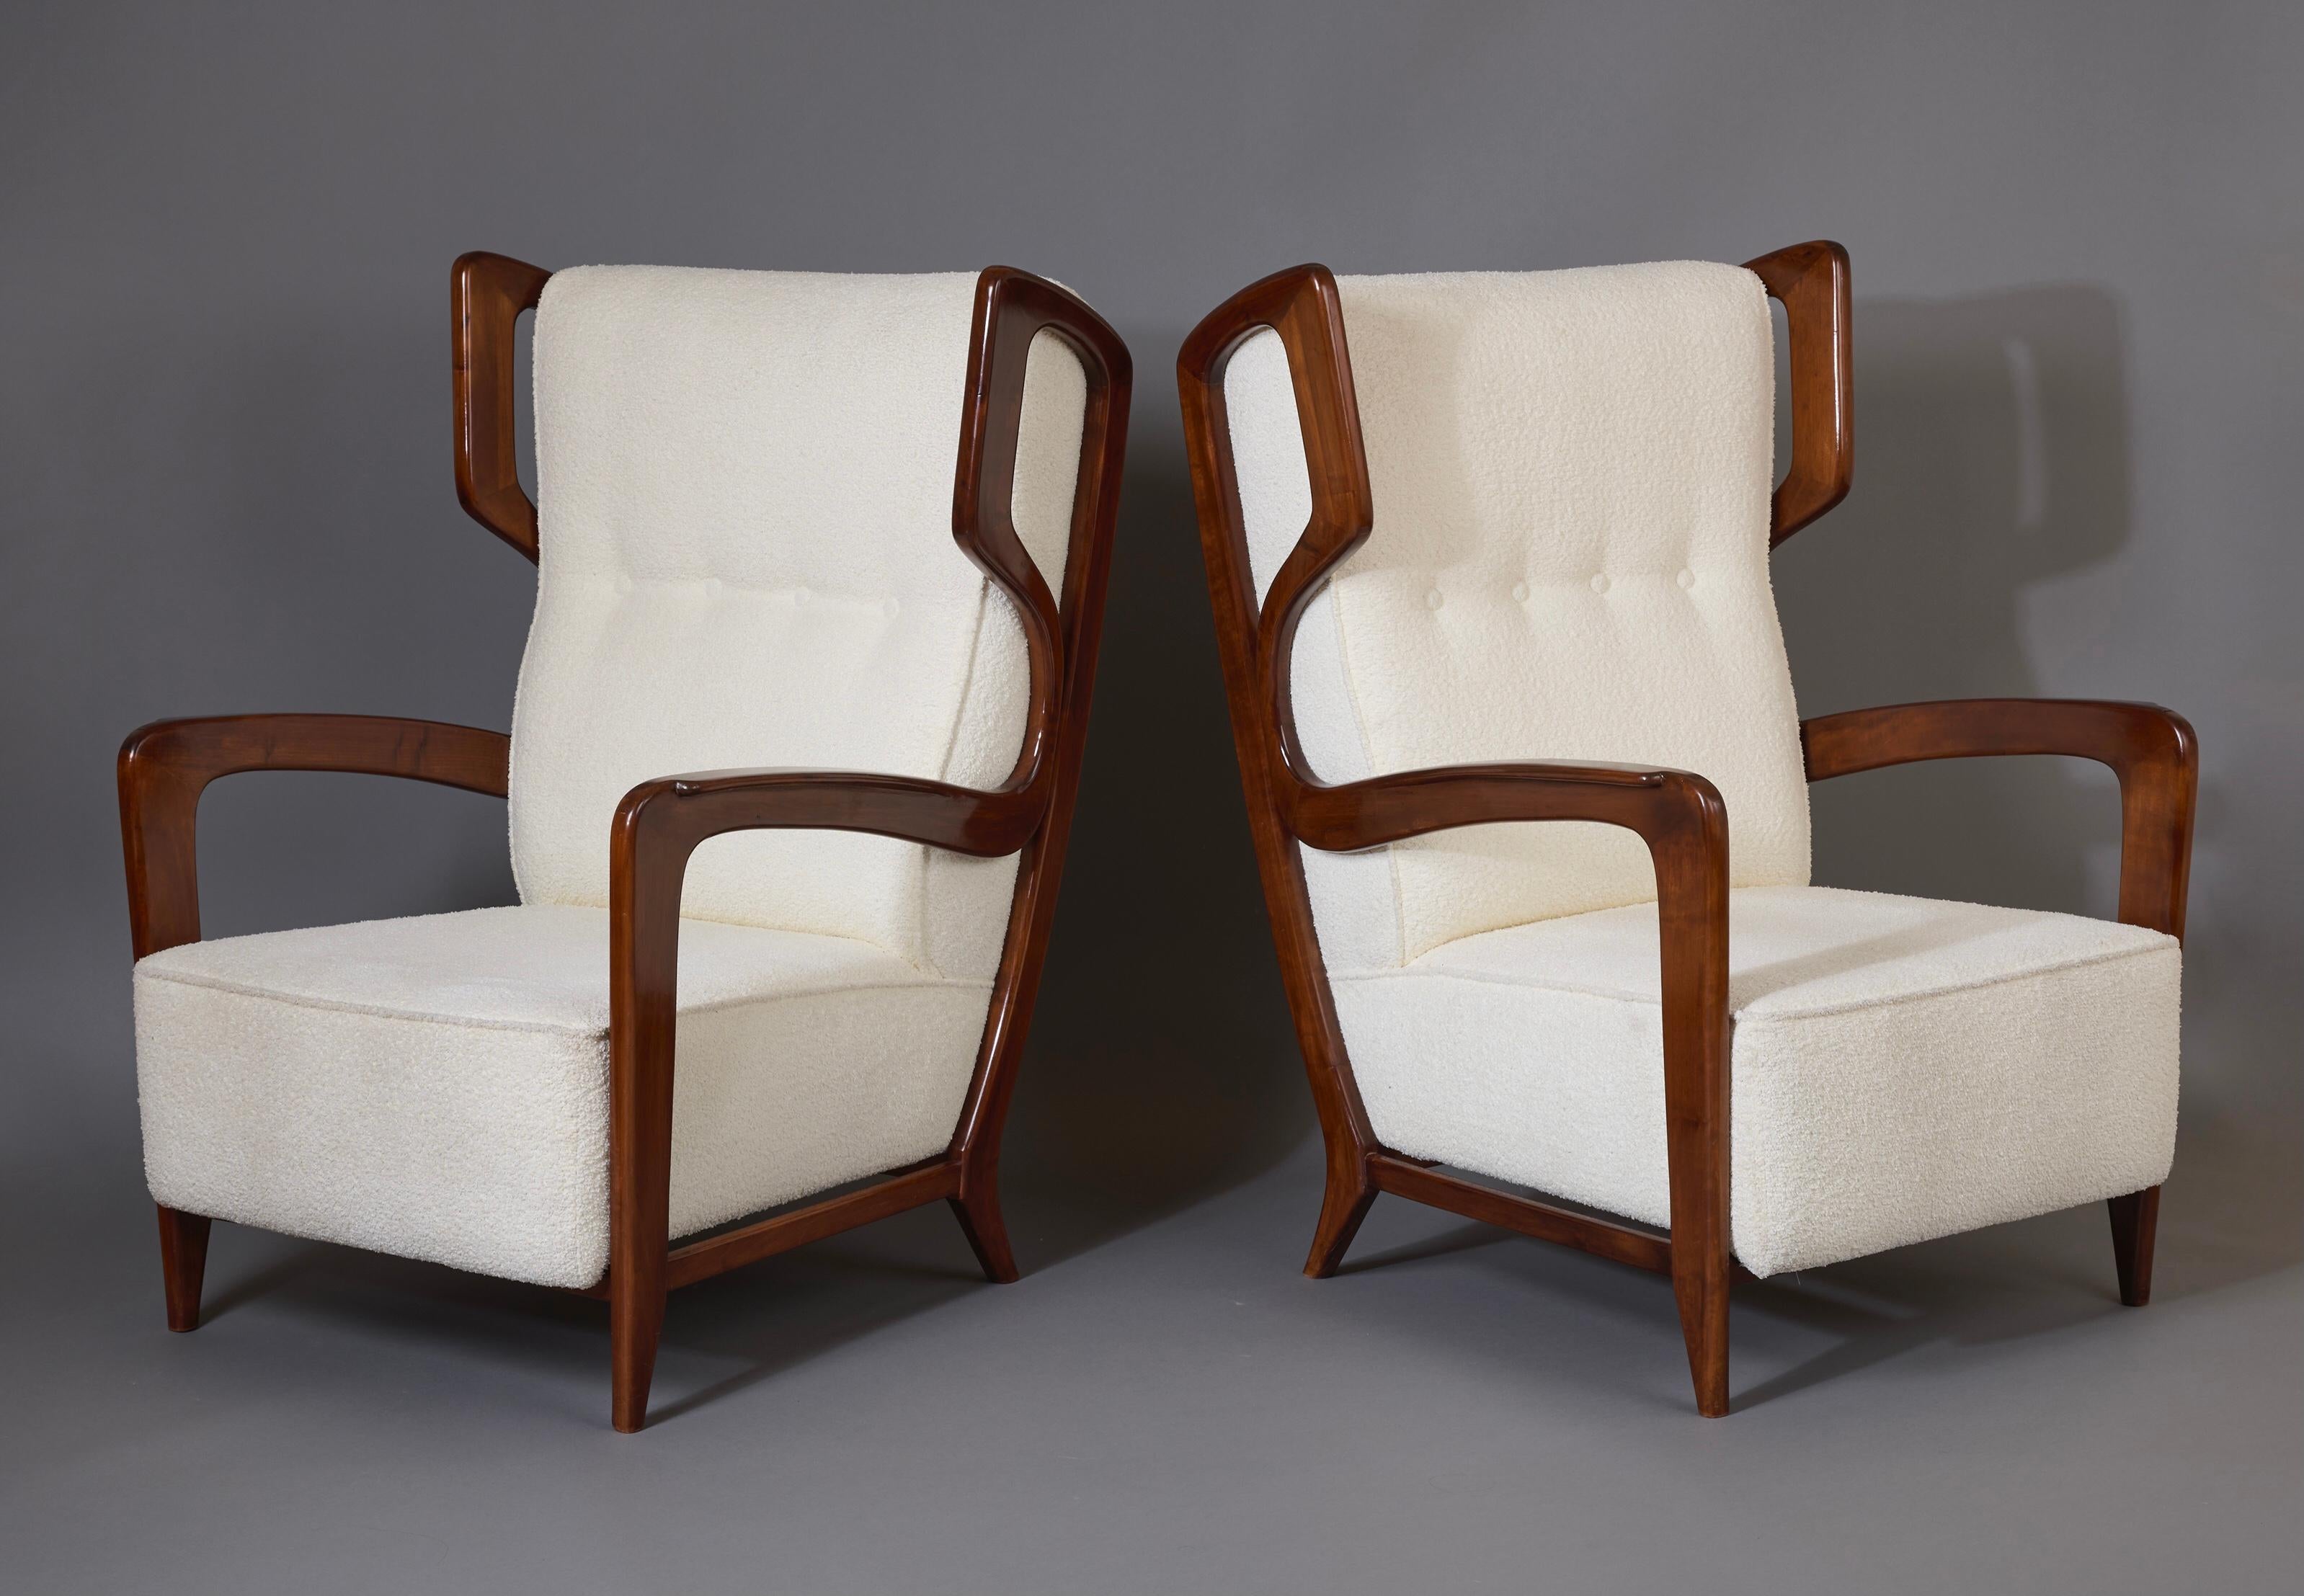 Gio Ponti (1891 - 1979)

A rare and extraordinary pair of wingback armchairs by modernist master Gio Ponti, in polished walnut with white bouclé upholstery. The chairs' striking filiform armature —a continuous ribbon that flows from the tapered legs